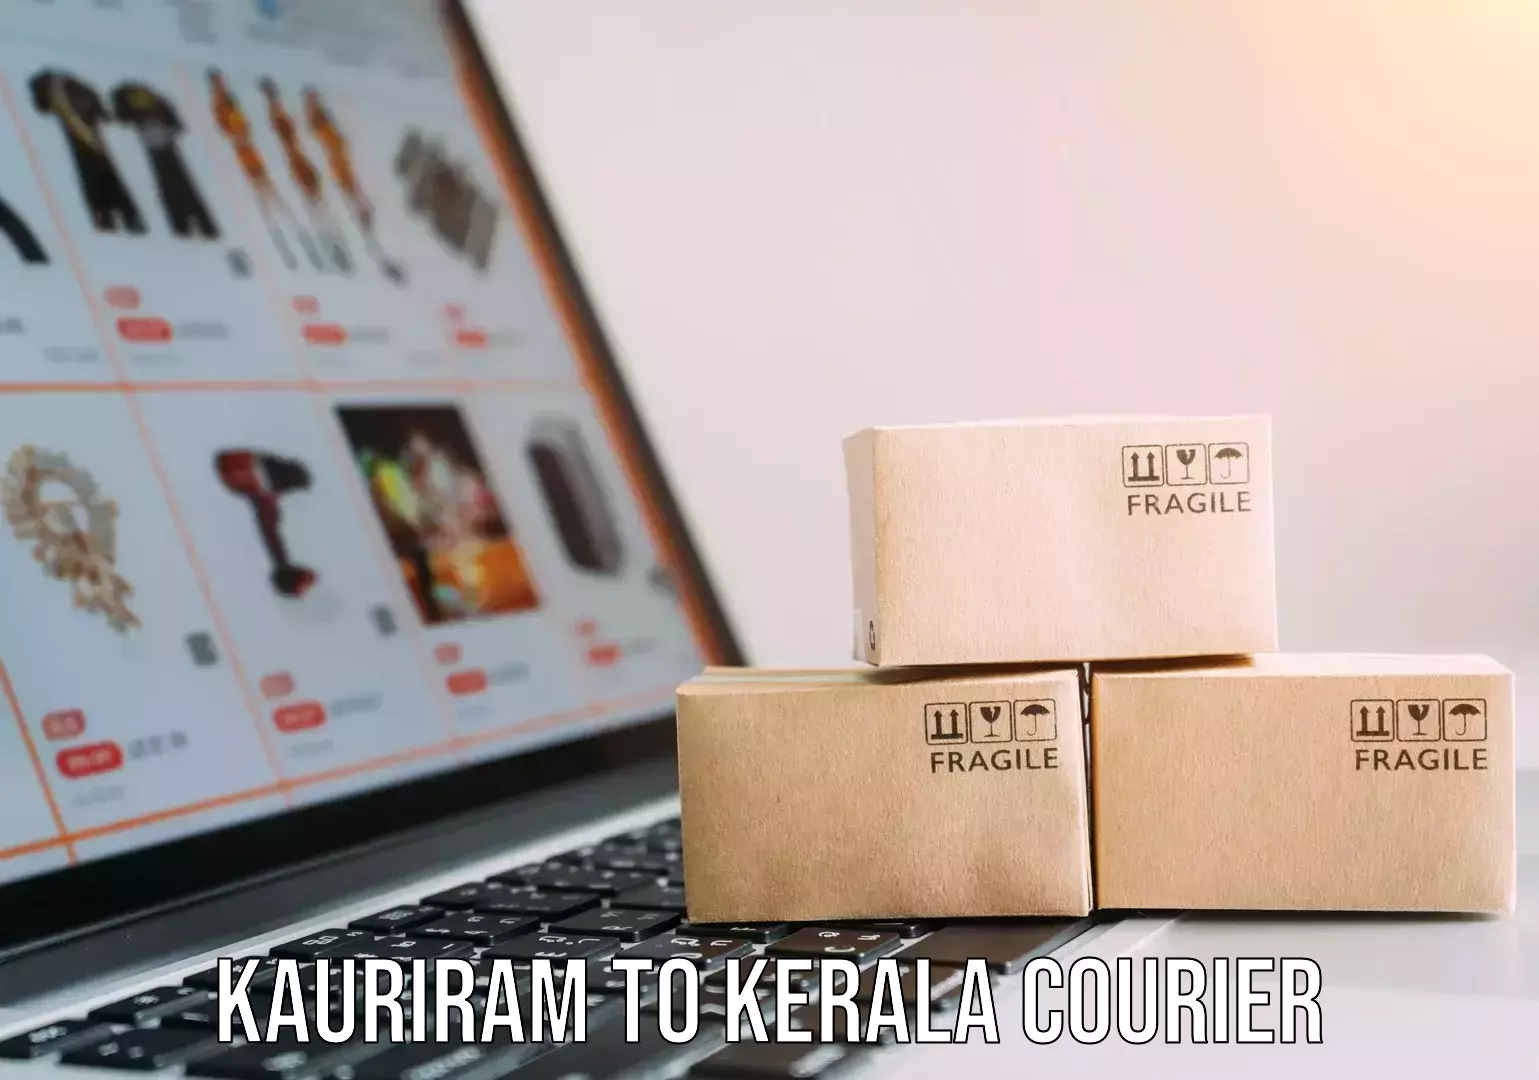 Efficient moving company in Kauriram to Kerala